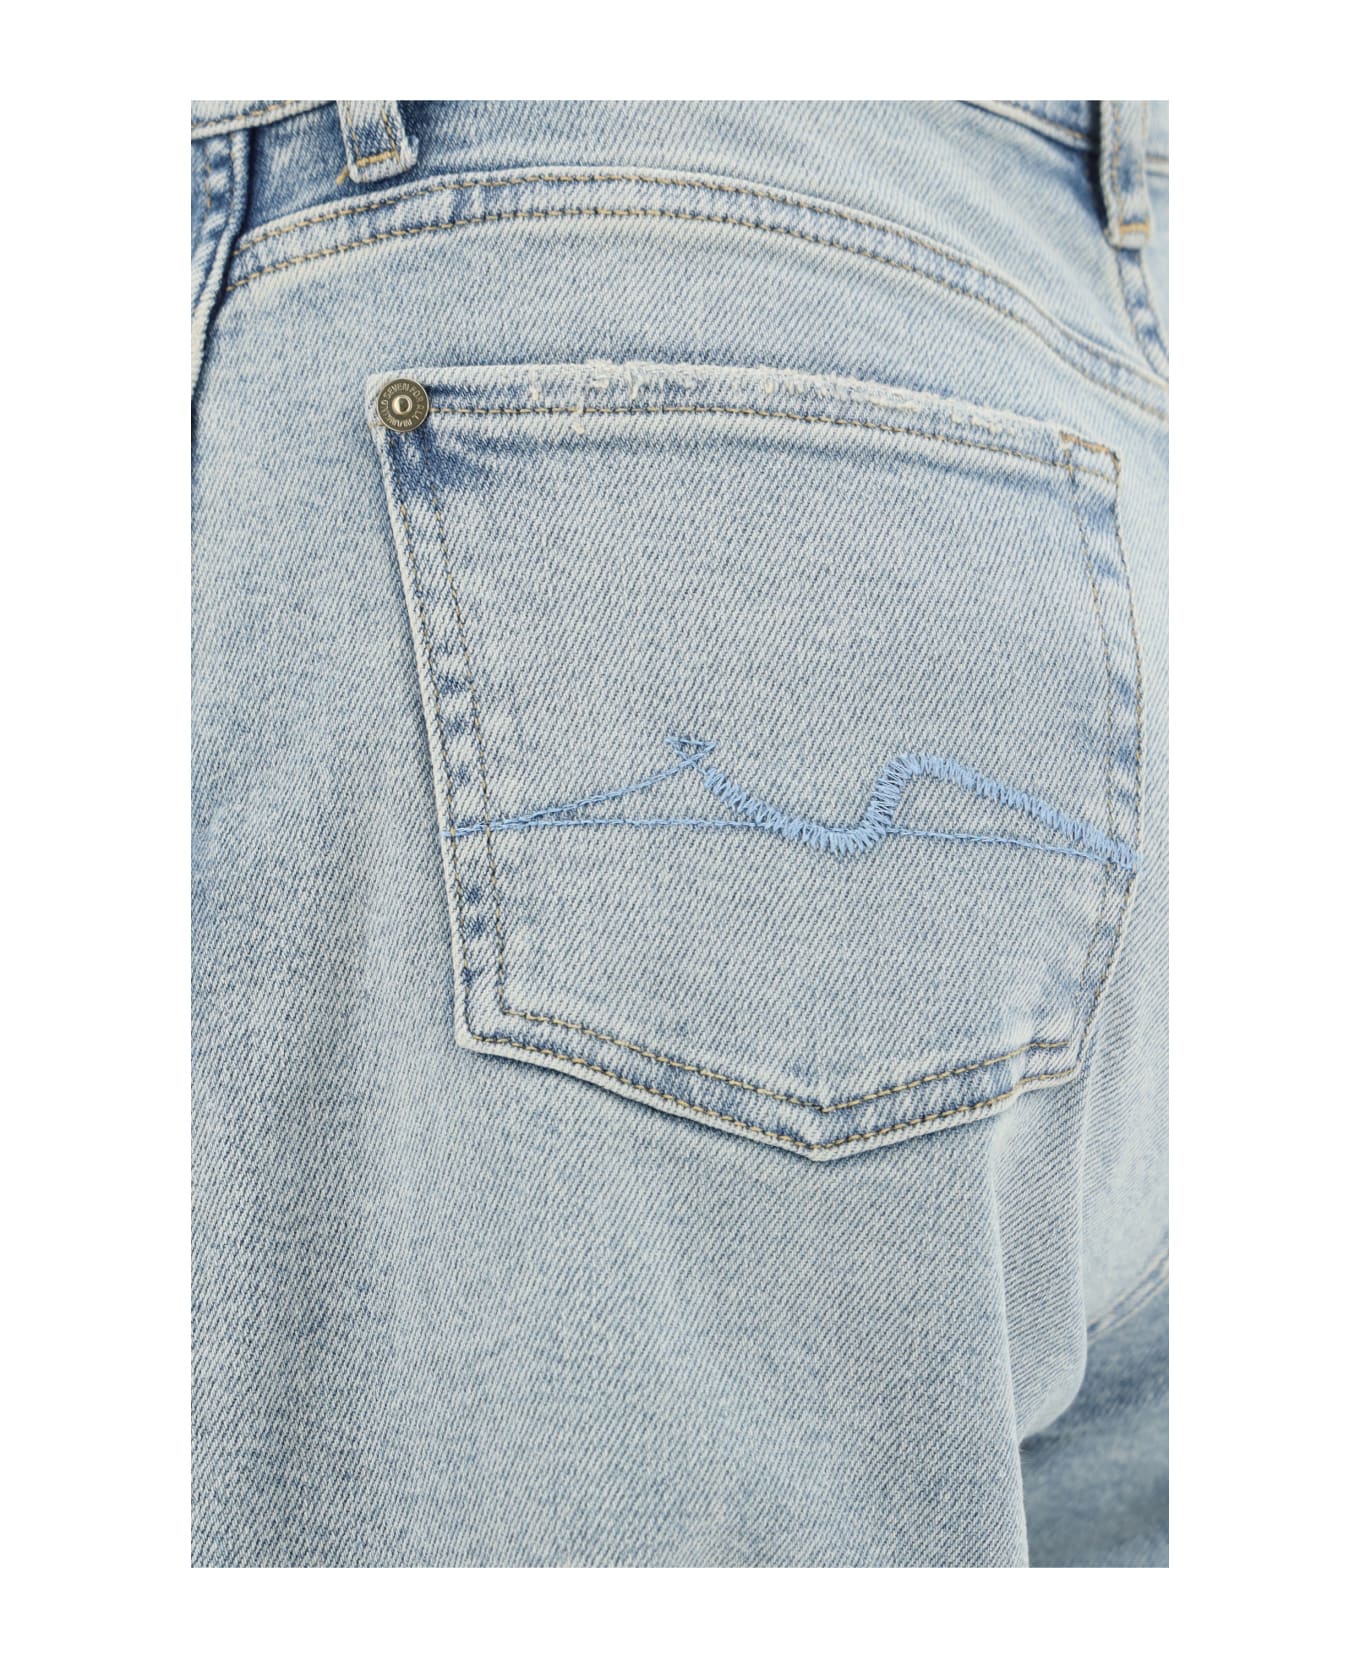 7 For All Mankind Jeans - Light Blue デニム